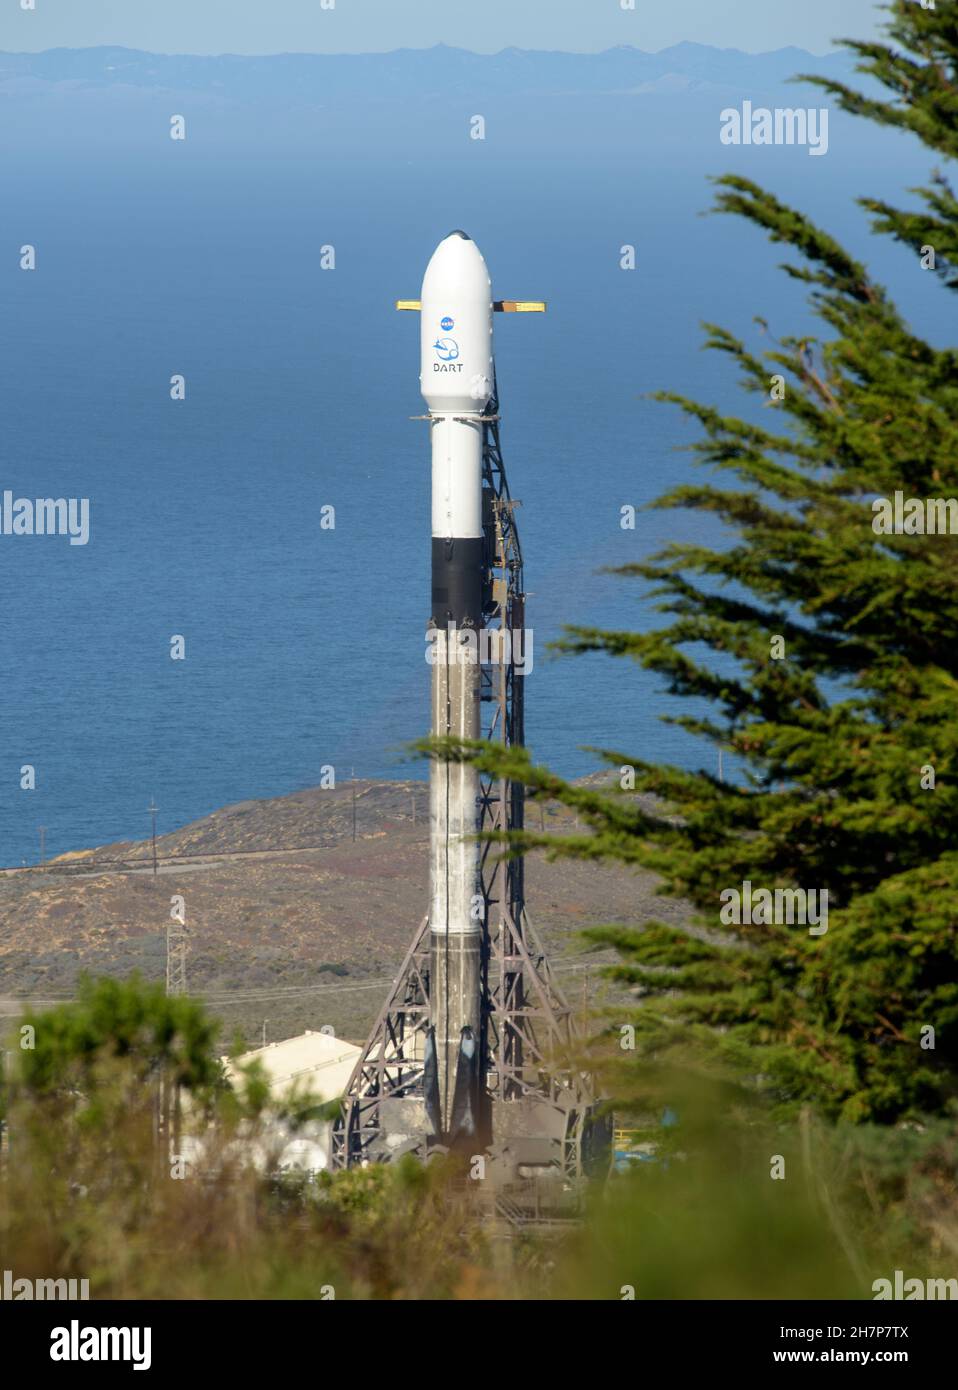 Vandenberg, United States Of America. 23rd Nov, 2021. Vandenberg, United States of America. 23 November, 2021. A SpaceX Falcon 9 booster rocket carrying the NASA planetary defense test mission, Double Asteroid Redirection Test, prepares for lift off from Space Launch Complex-4 at Vandenberg Space Force Base November 23, 2021 in Vandenberg, California. The DART spacecraft is designed to crash into an asteroid while traveling at a speed of 15,000 miles per hour to alter the path to prevent impact on Earth. Credit: Bill Ingalls/NASA/Alamy Live News Stock Photo